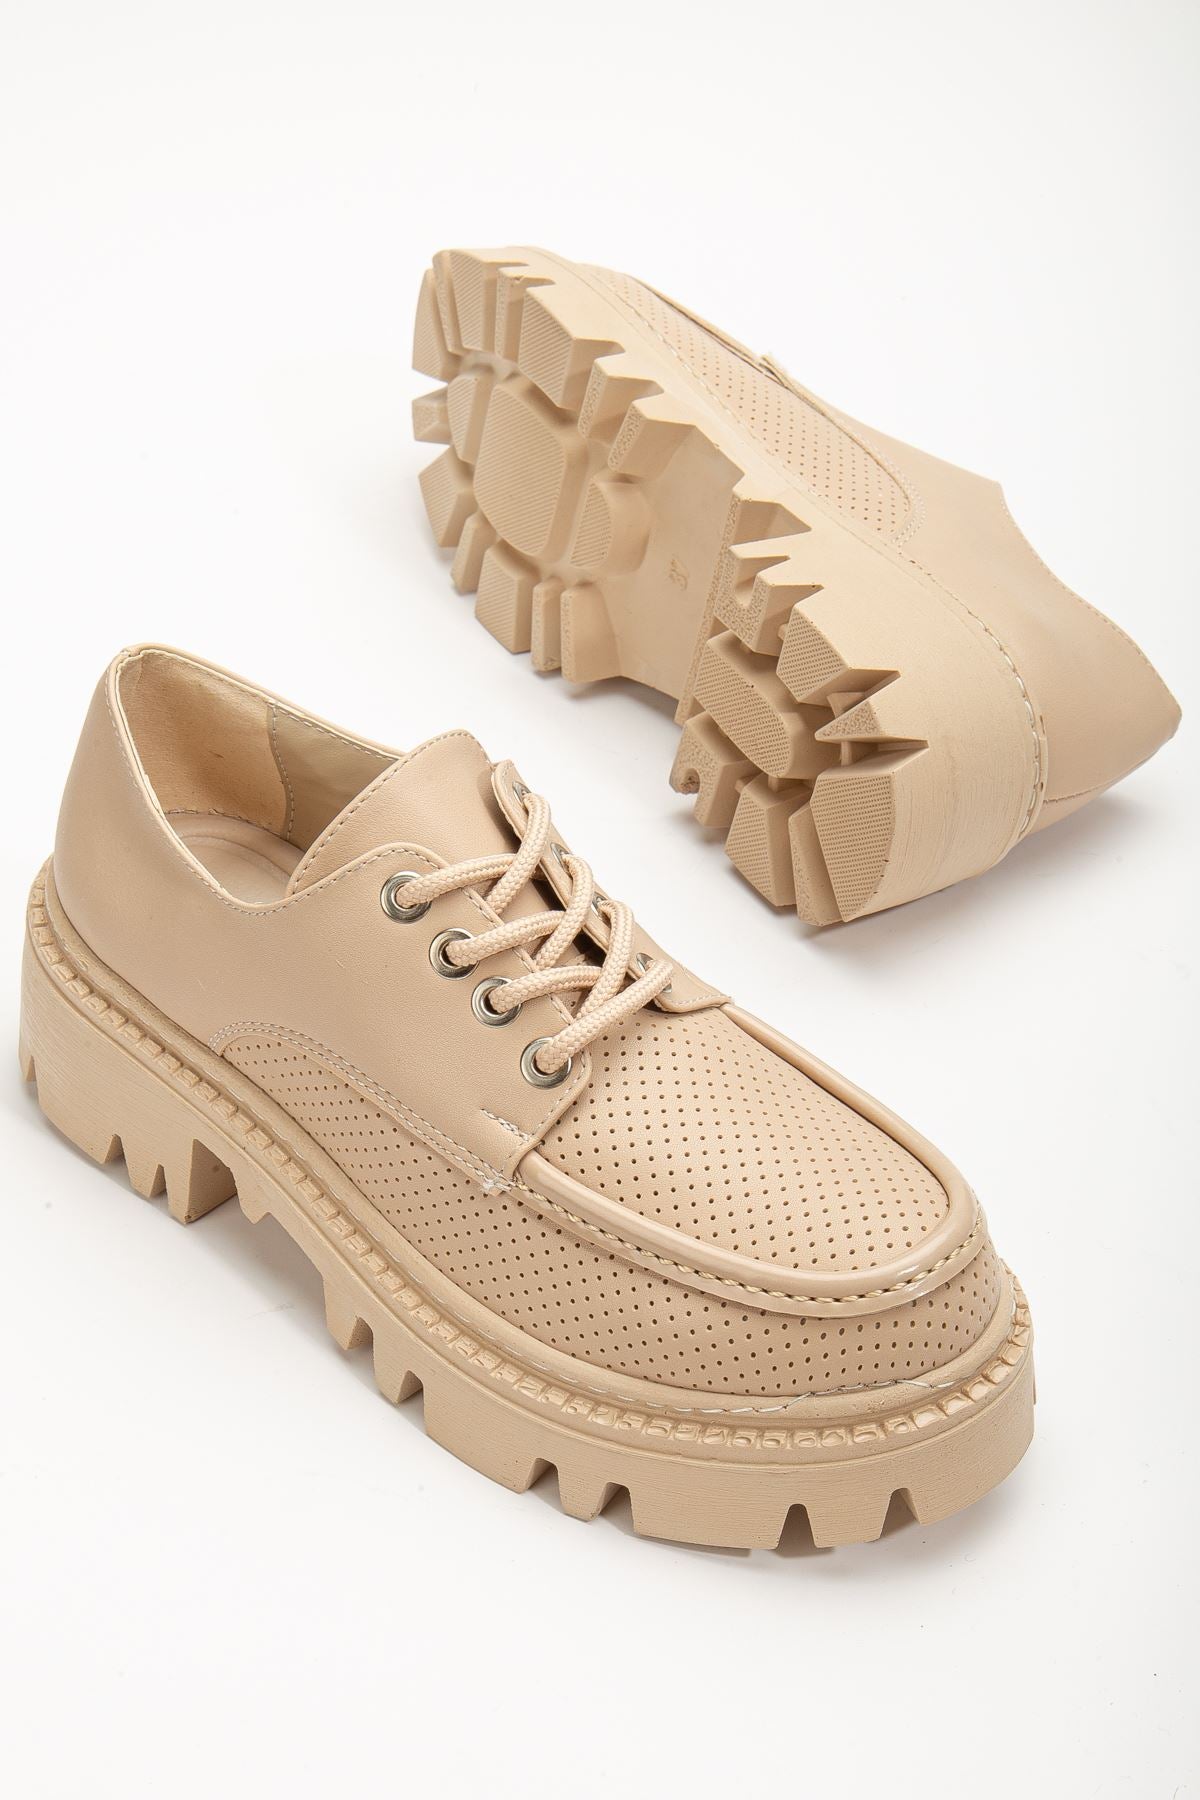 Women's Nude Lacing Detailed Oxford Shoes - STREETMODE™